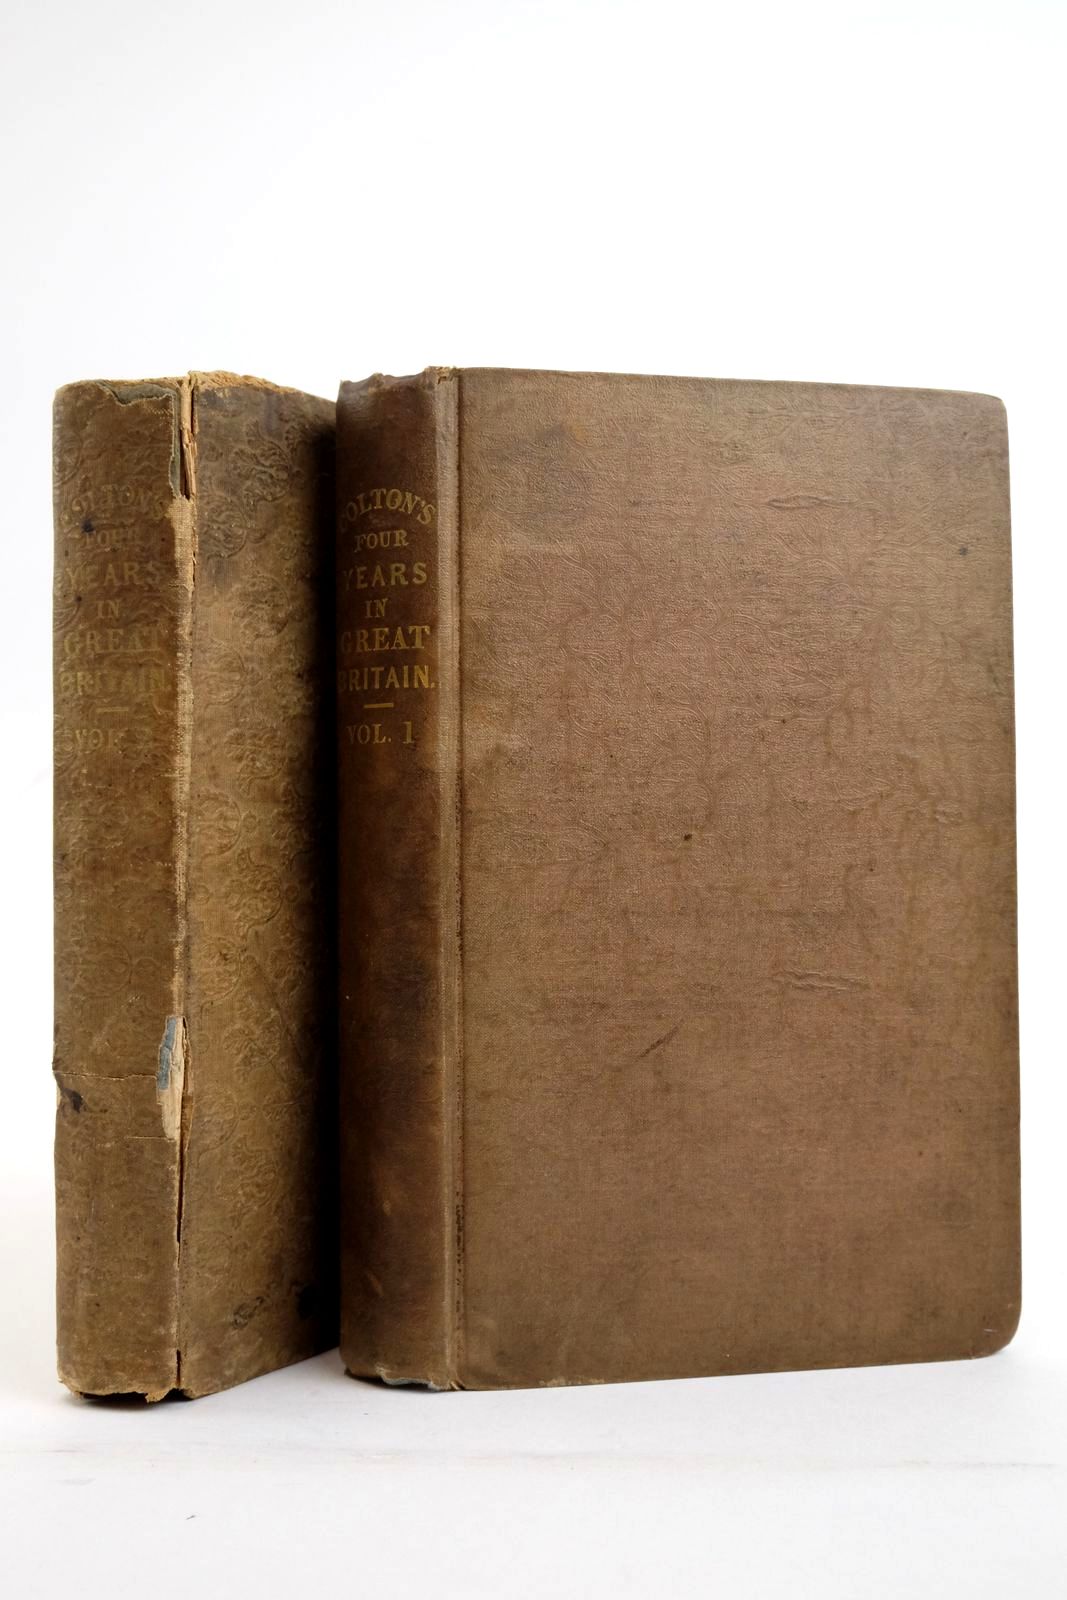 Photo of FOUR YEARS IN GREAT BRITAIN 1831-1835 (2 VOLUMES)- Stock Number: 2135878